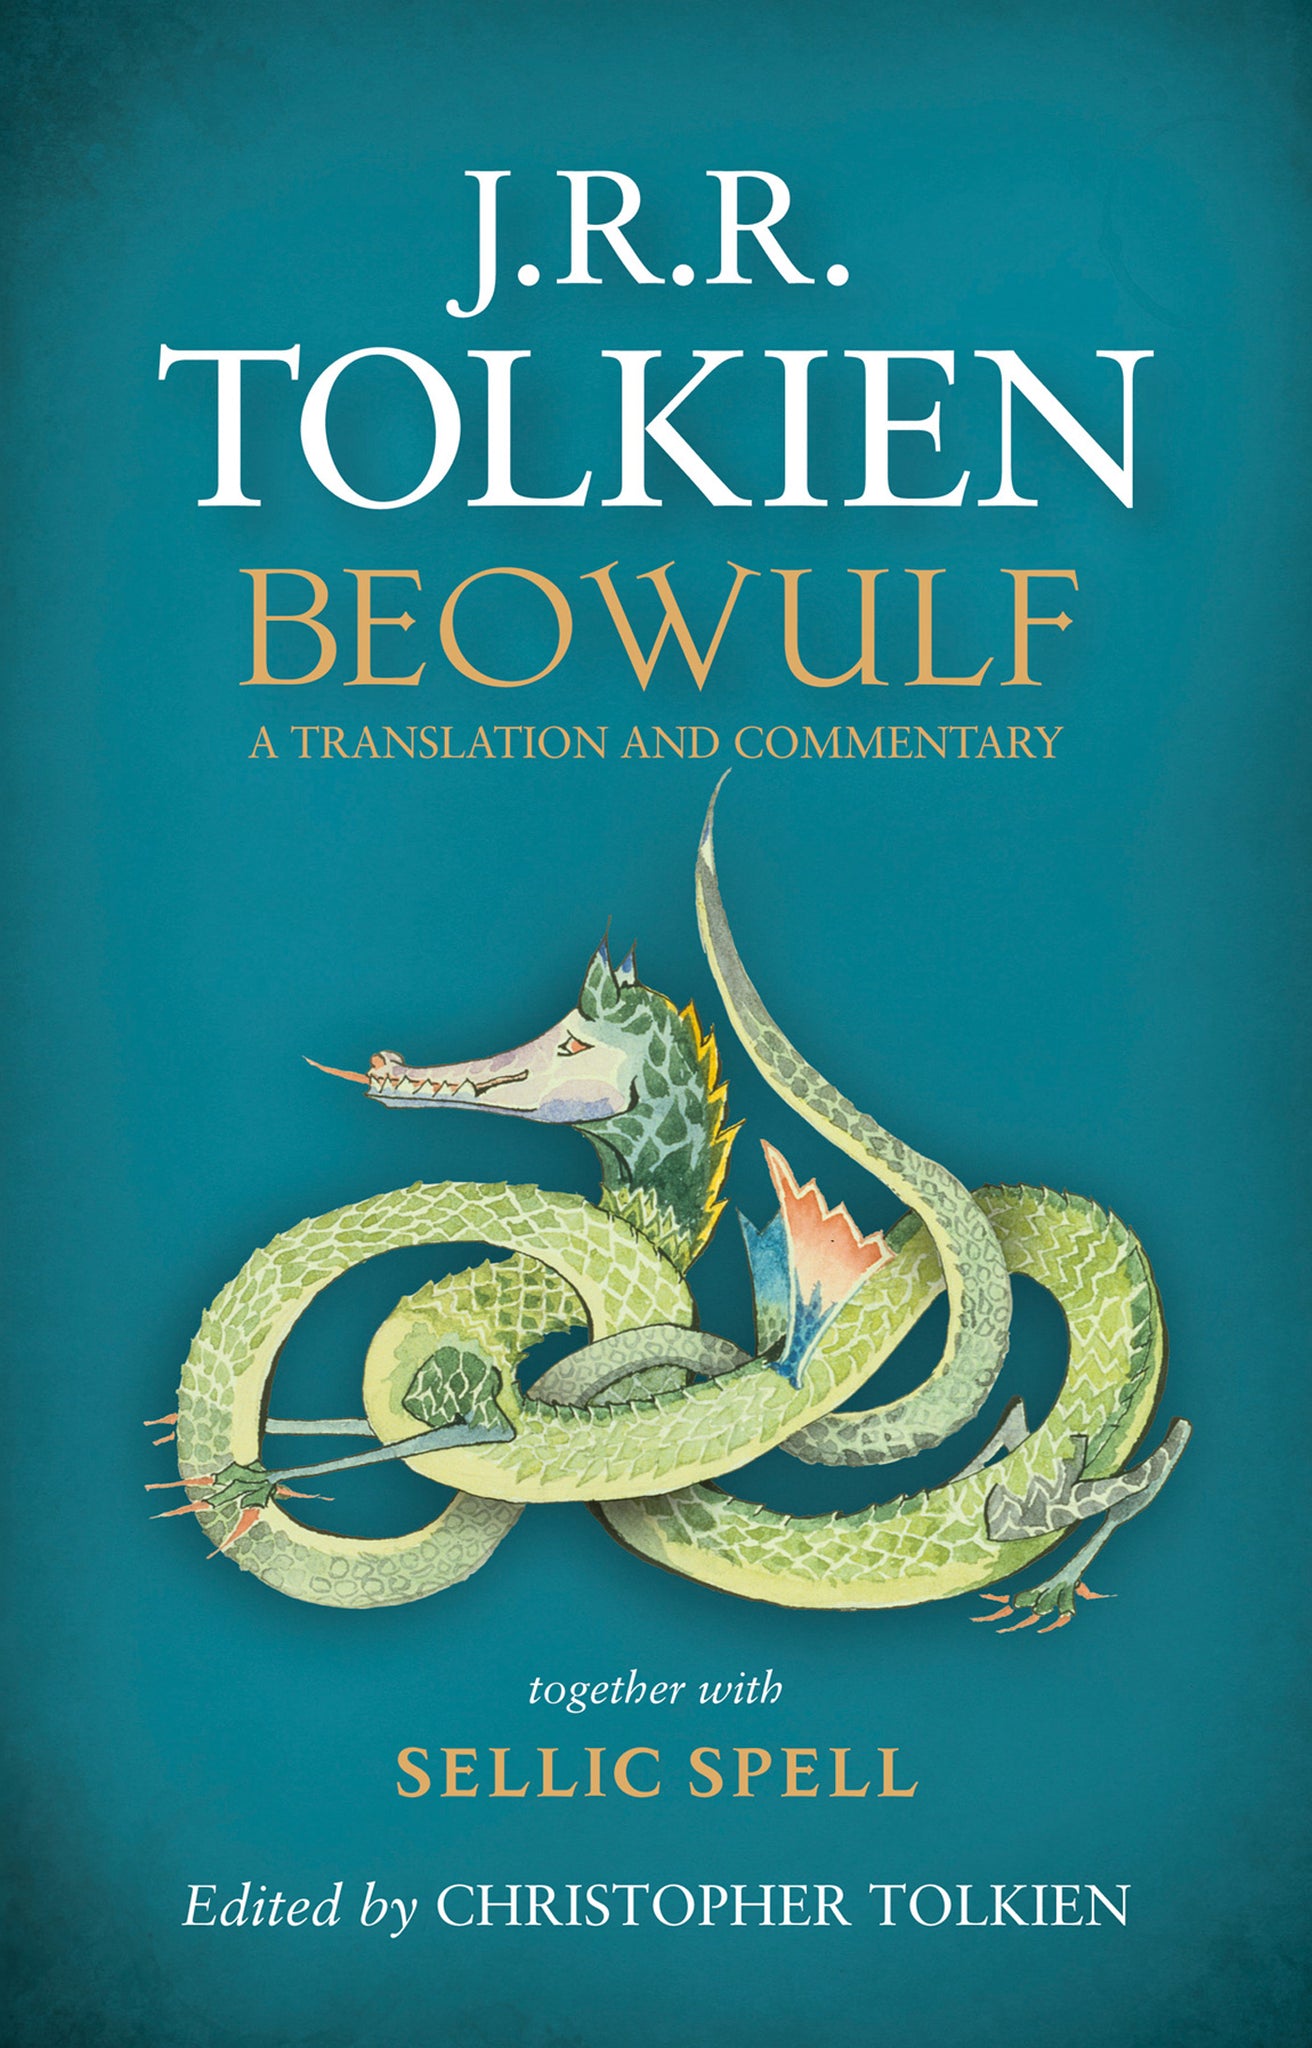 Beowulf translated by J.R.R. Tolkien